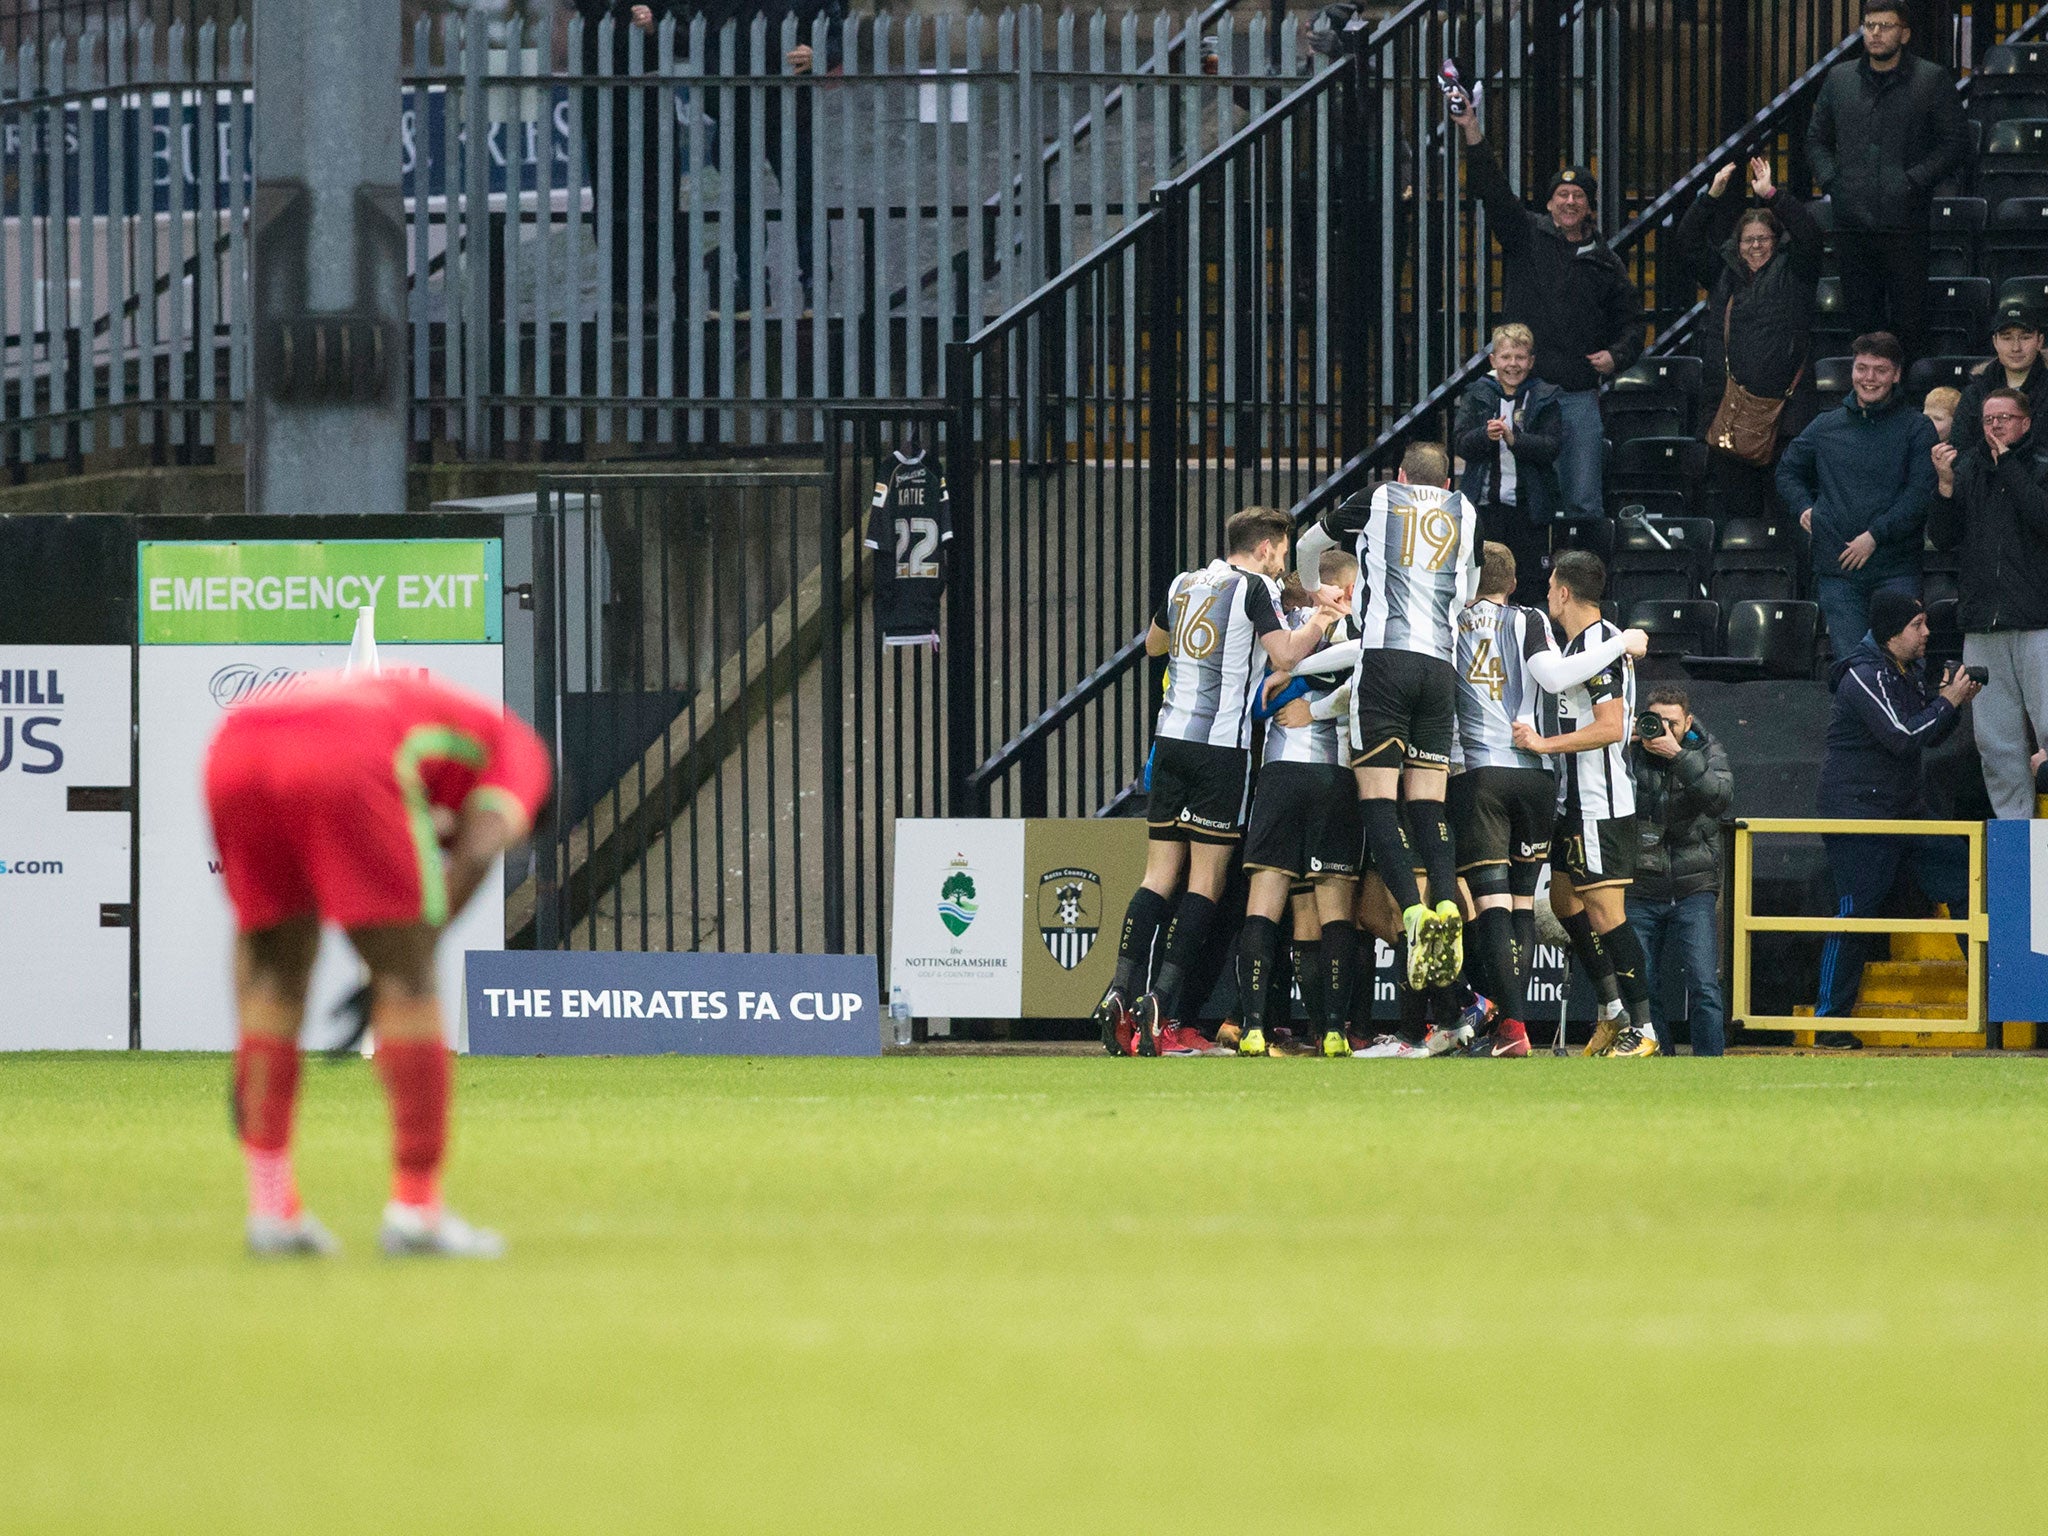 Jon Stead celebrates with his teammates after scoring Notts County's equaliser